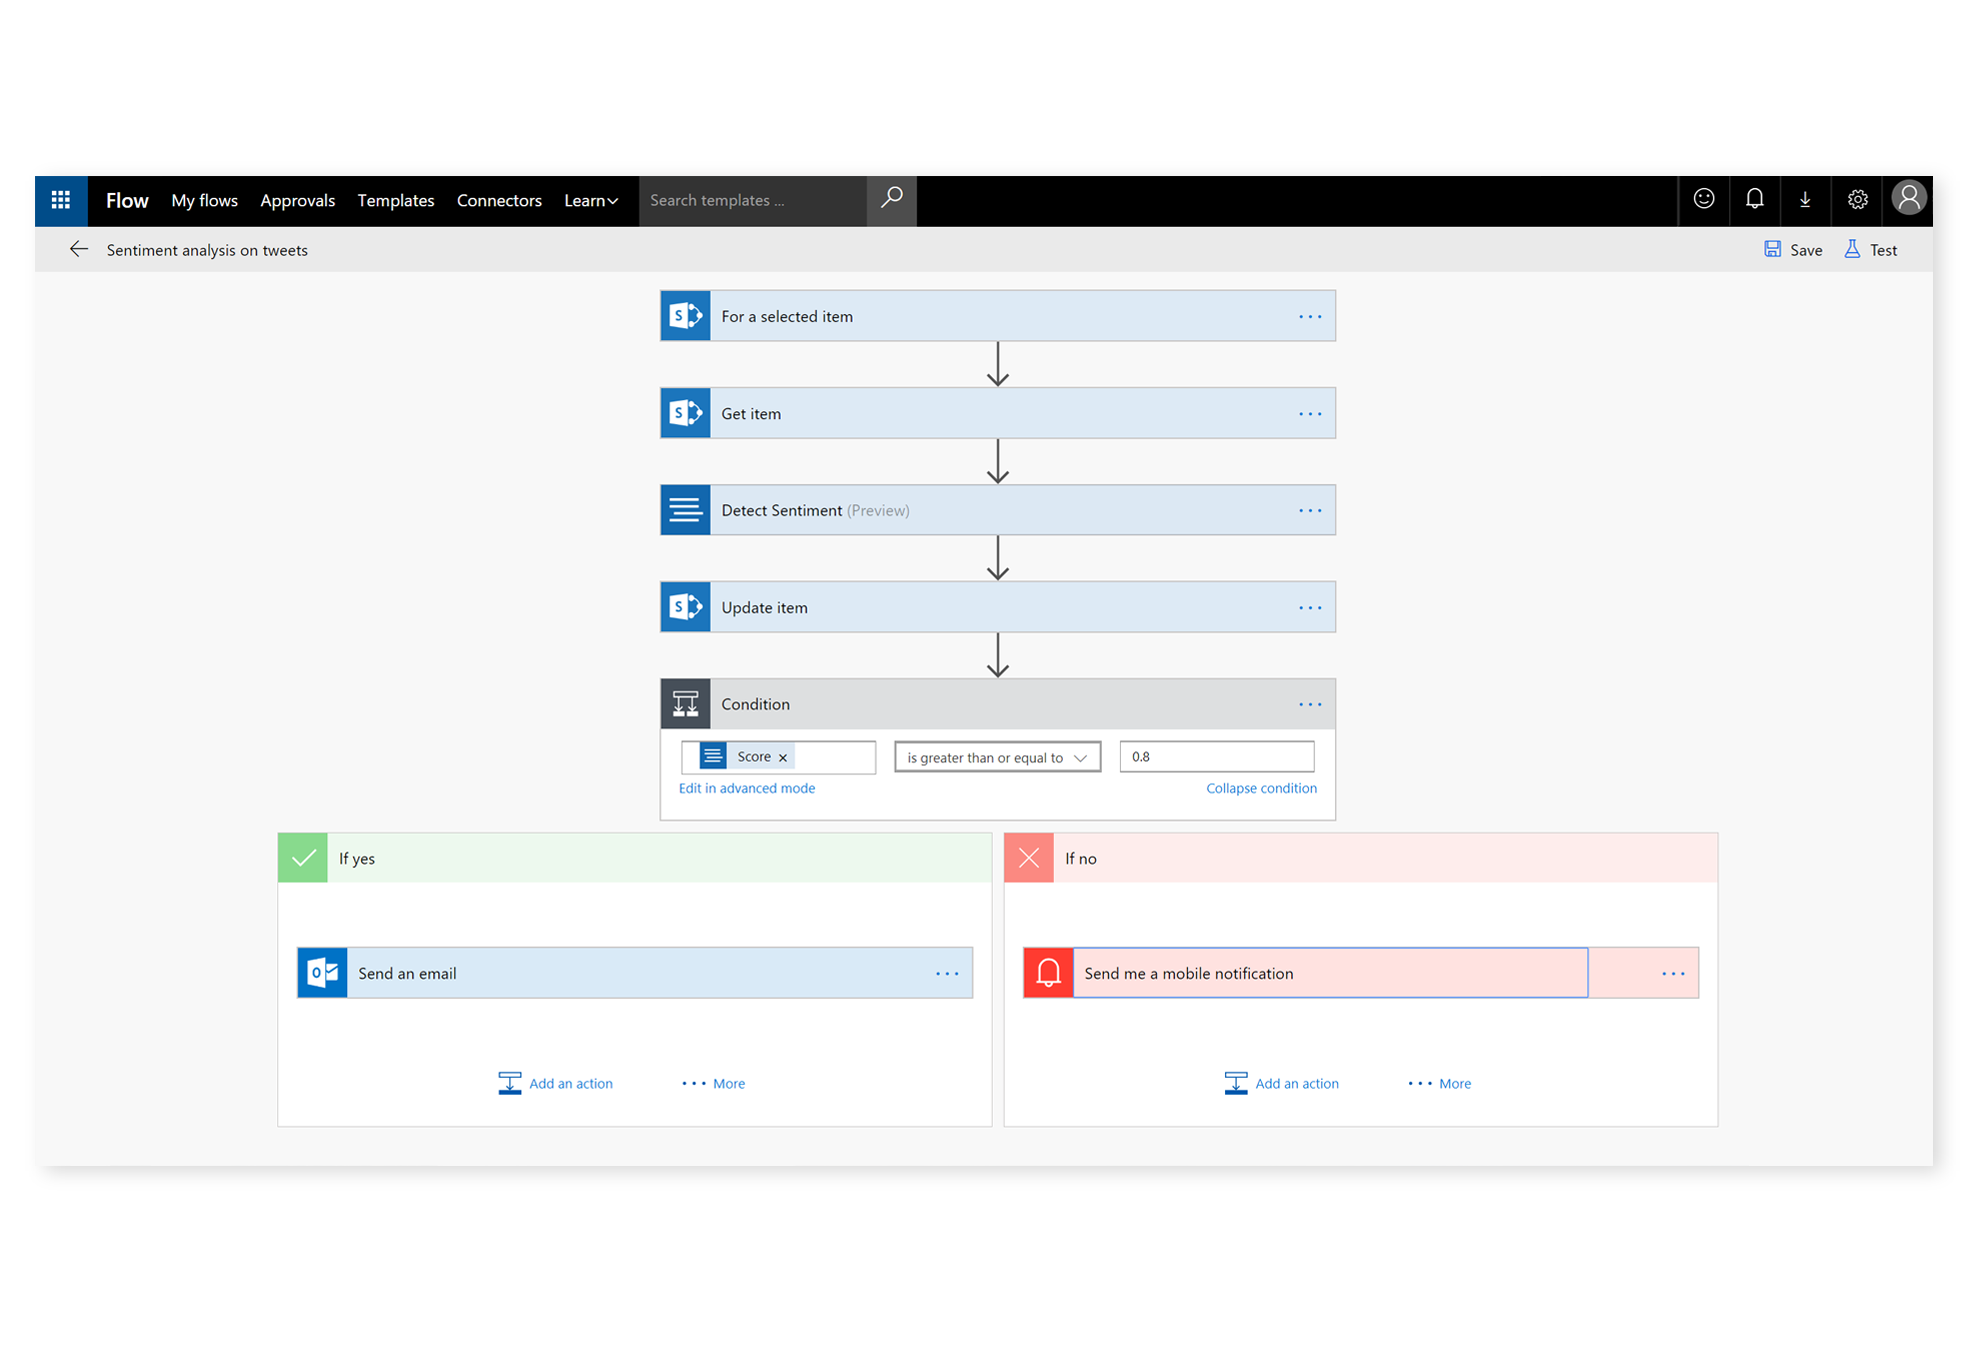 A screenshot of Power Apps showing a visualization of a workflow